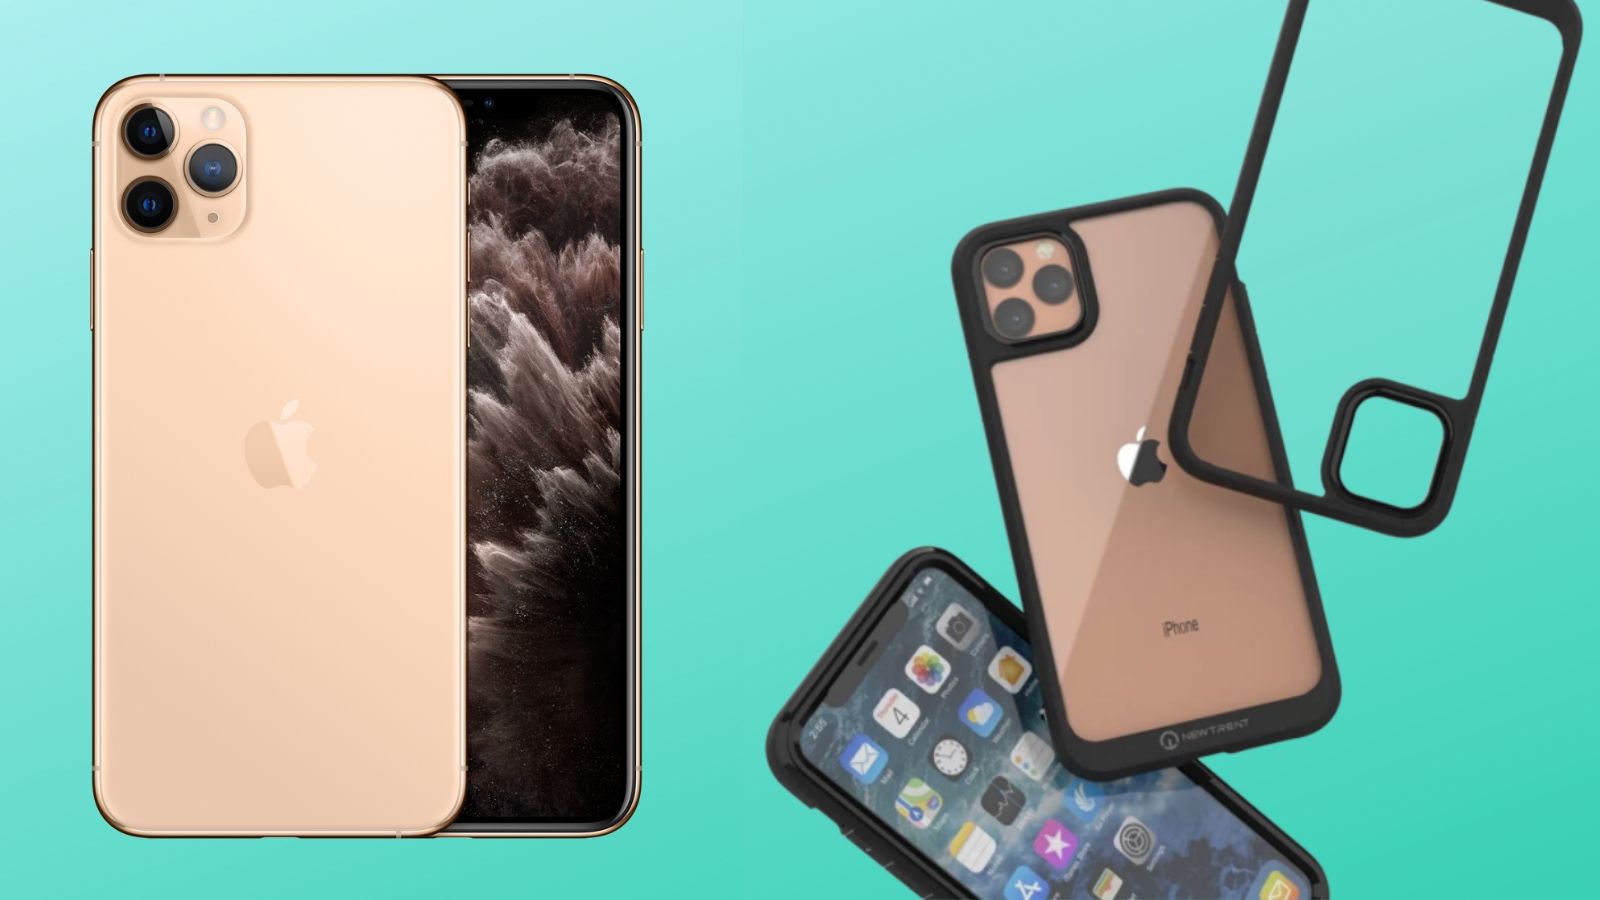 8 Best iPhone 11 Pro Max Cases to Buy in 2019 For Apple's Best iPhone